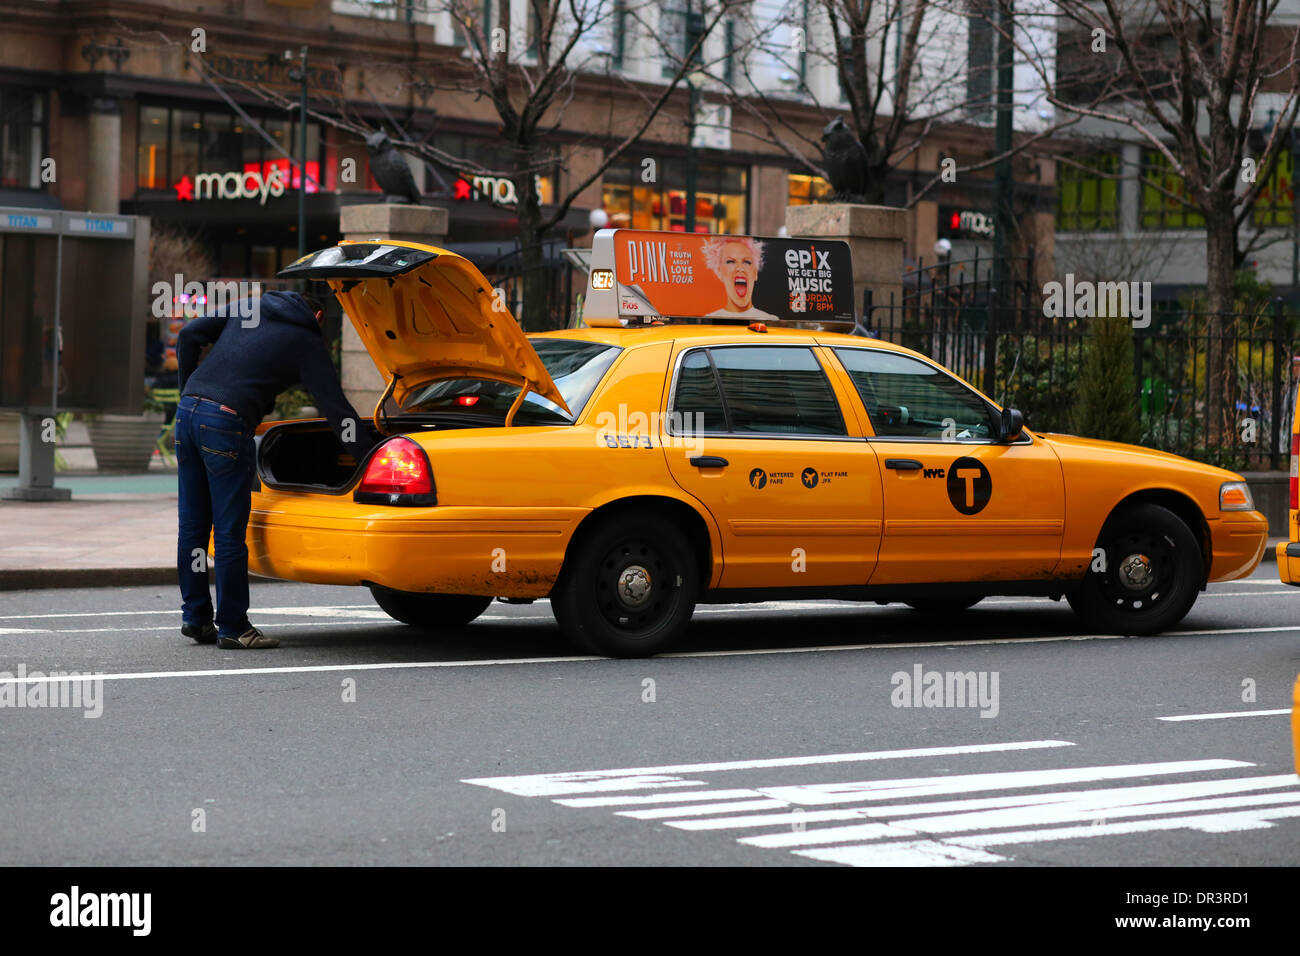 A person checks the truck of a taxi cab in New York City Stock Photo